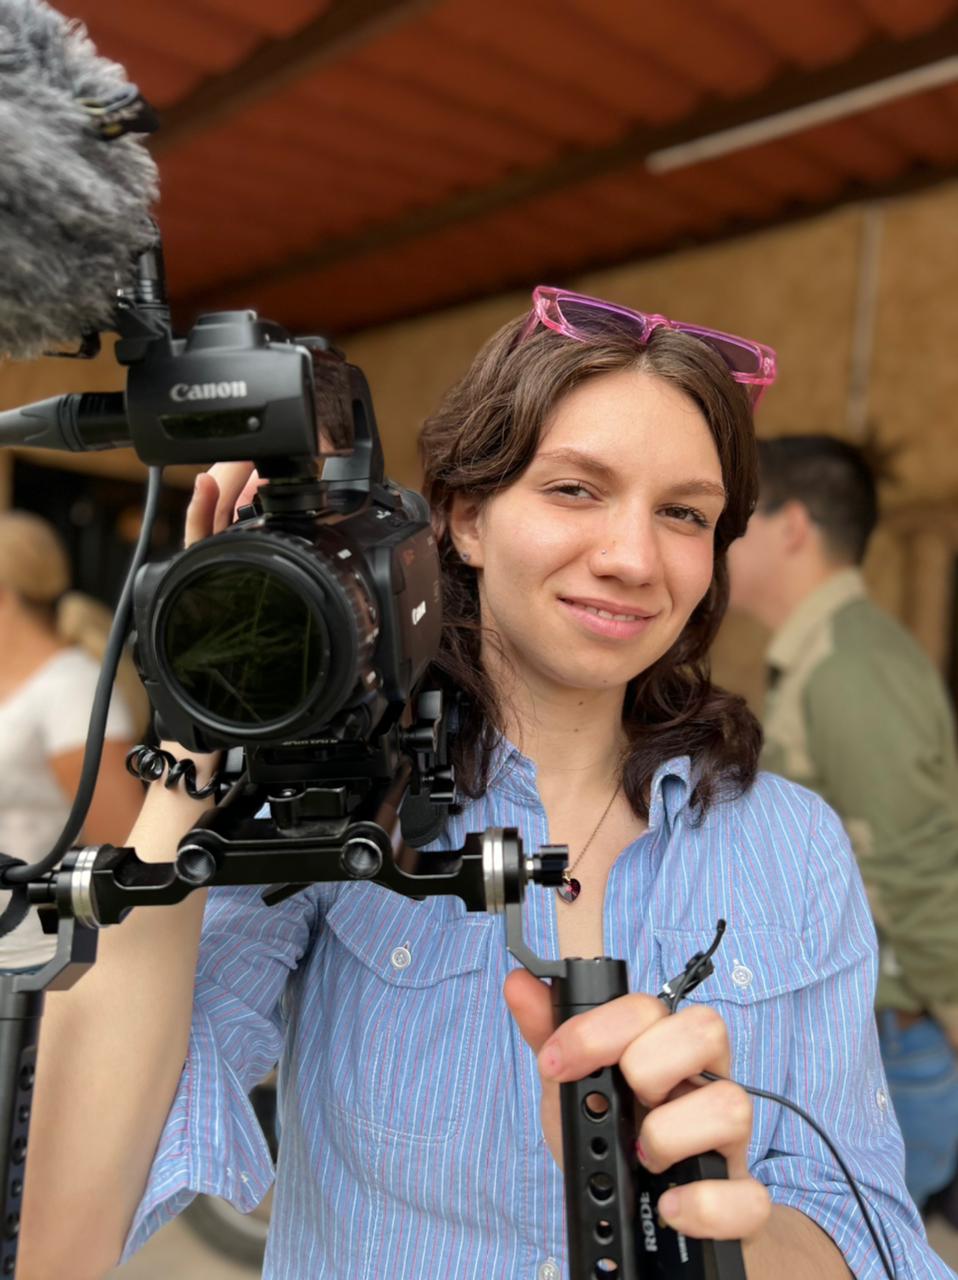 A photograph portrait of a woman holding a video camera pointed at the photographer